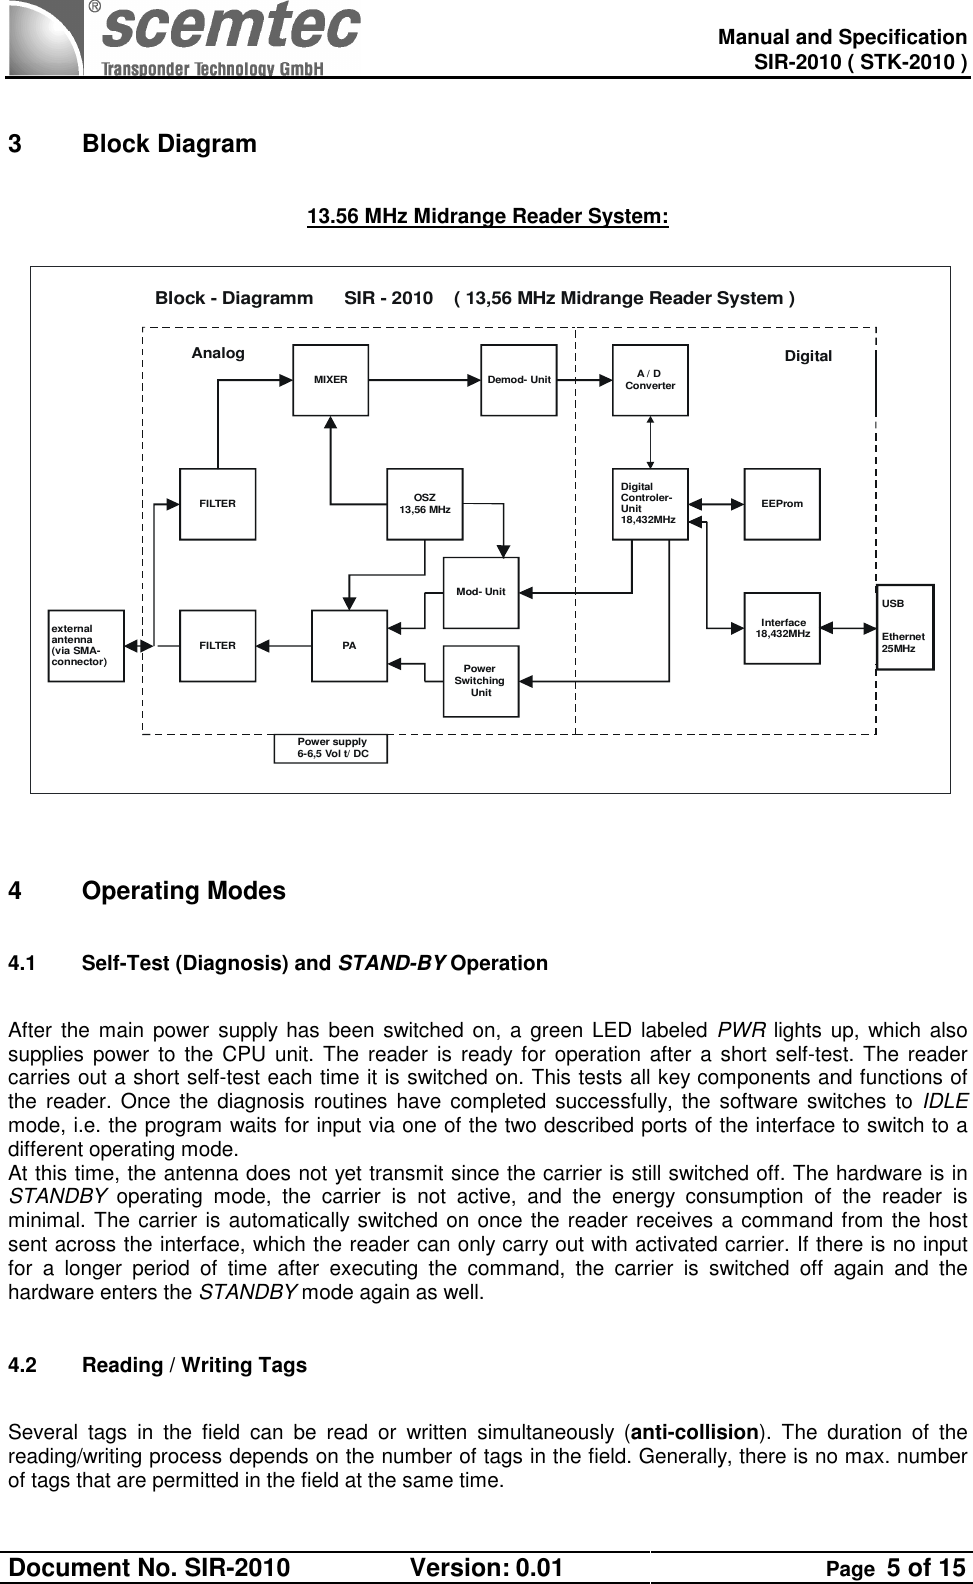   Manual and Specification SIR-2010 ( STK-2010 ) Document No. SIR-2010  Version: 0.01  Page  5 of 15   3  Block Diagram  13.56 MHz Midrange Reader System:  Power supply6-6,5 Vol t/ DCexternalantenna(via SMA-connector)Mod- UnitFILTERPower Switching UnitFILTERMIXEROSZ13,56 MHzDemod- UnitA / D ConverterUSBEthernet25MHzEEPromDigitalControler-Unit18,432MHz  Interface18,432MHzBlock - Diagramm      SIR - 2010    ( 13,56 MHz Midrange Reader System )PAAnalogDigital   4  Operating Modes 4.1  Self-Test (Diagnosis) and STAND-BY Operation  After  the  main  power supply has  been switched on, a  green LED labeled PWR lights up, which also supplies power  to the CPU  unit.  The  reader  is  ready for operation after a short self-test.  The  reader carries out a short self-test each time it is switched on. This tests all key components and functions of the  reader.  Once  the  diagnosis routines have completed successfully, the software  switches to  IDLE mode, i.e. the program waits for input via one of the two described ports of the interface to switch to a different operating mode.  At this time, the antenna does not yet transmit since the carrier is still switched off. The hardware is in STANDBY  operating  mode,  the  carrier  is  not  active,  and  the  energy  consumption  of  the  reader  is minimal. The carrier is automatically switched on once the reader receives a command from the host sent across the interface, which the reader can only carry out with activated carrier. If there is no input for  a  longer  period  of  time  after  executing  the  command,  the  carrier  is  switched  off  again  and  the hardware enters the STANDBY mode again as well.  4.2  Reading / Writing Tags  Several  tags  in  the  field  can  be  read  or  written  simultaneously  (anti-collision). The  duration  of  the reading/writing process depends on the number of tags in the field. Generally, there is no max. number of tags that are permitted in the field at the same time. 